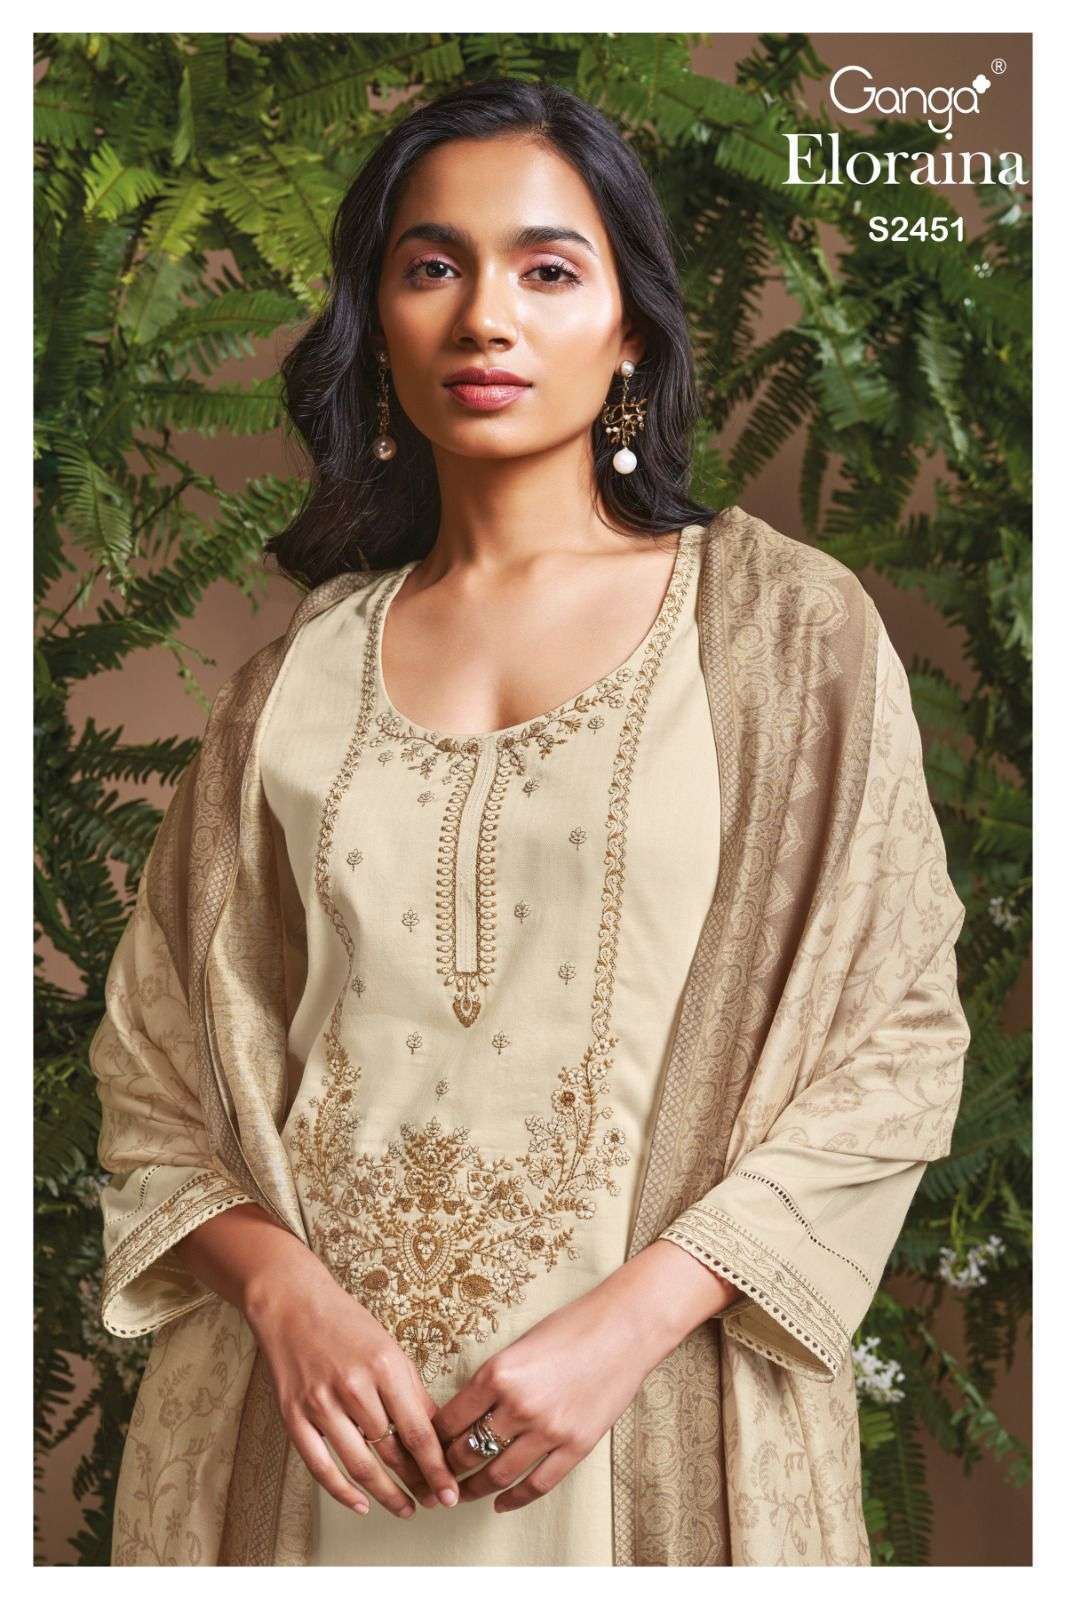 Ganga Eloraina 2451 cotton suits with neck embroidery work d...